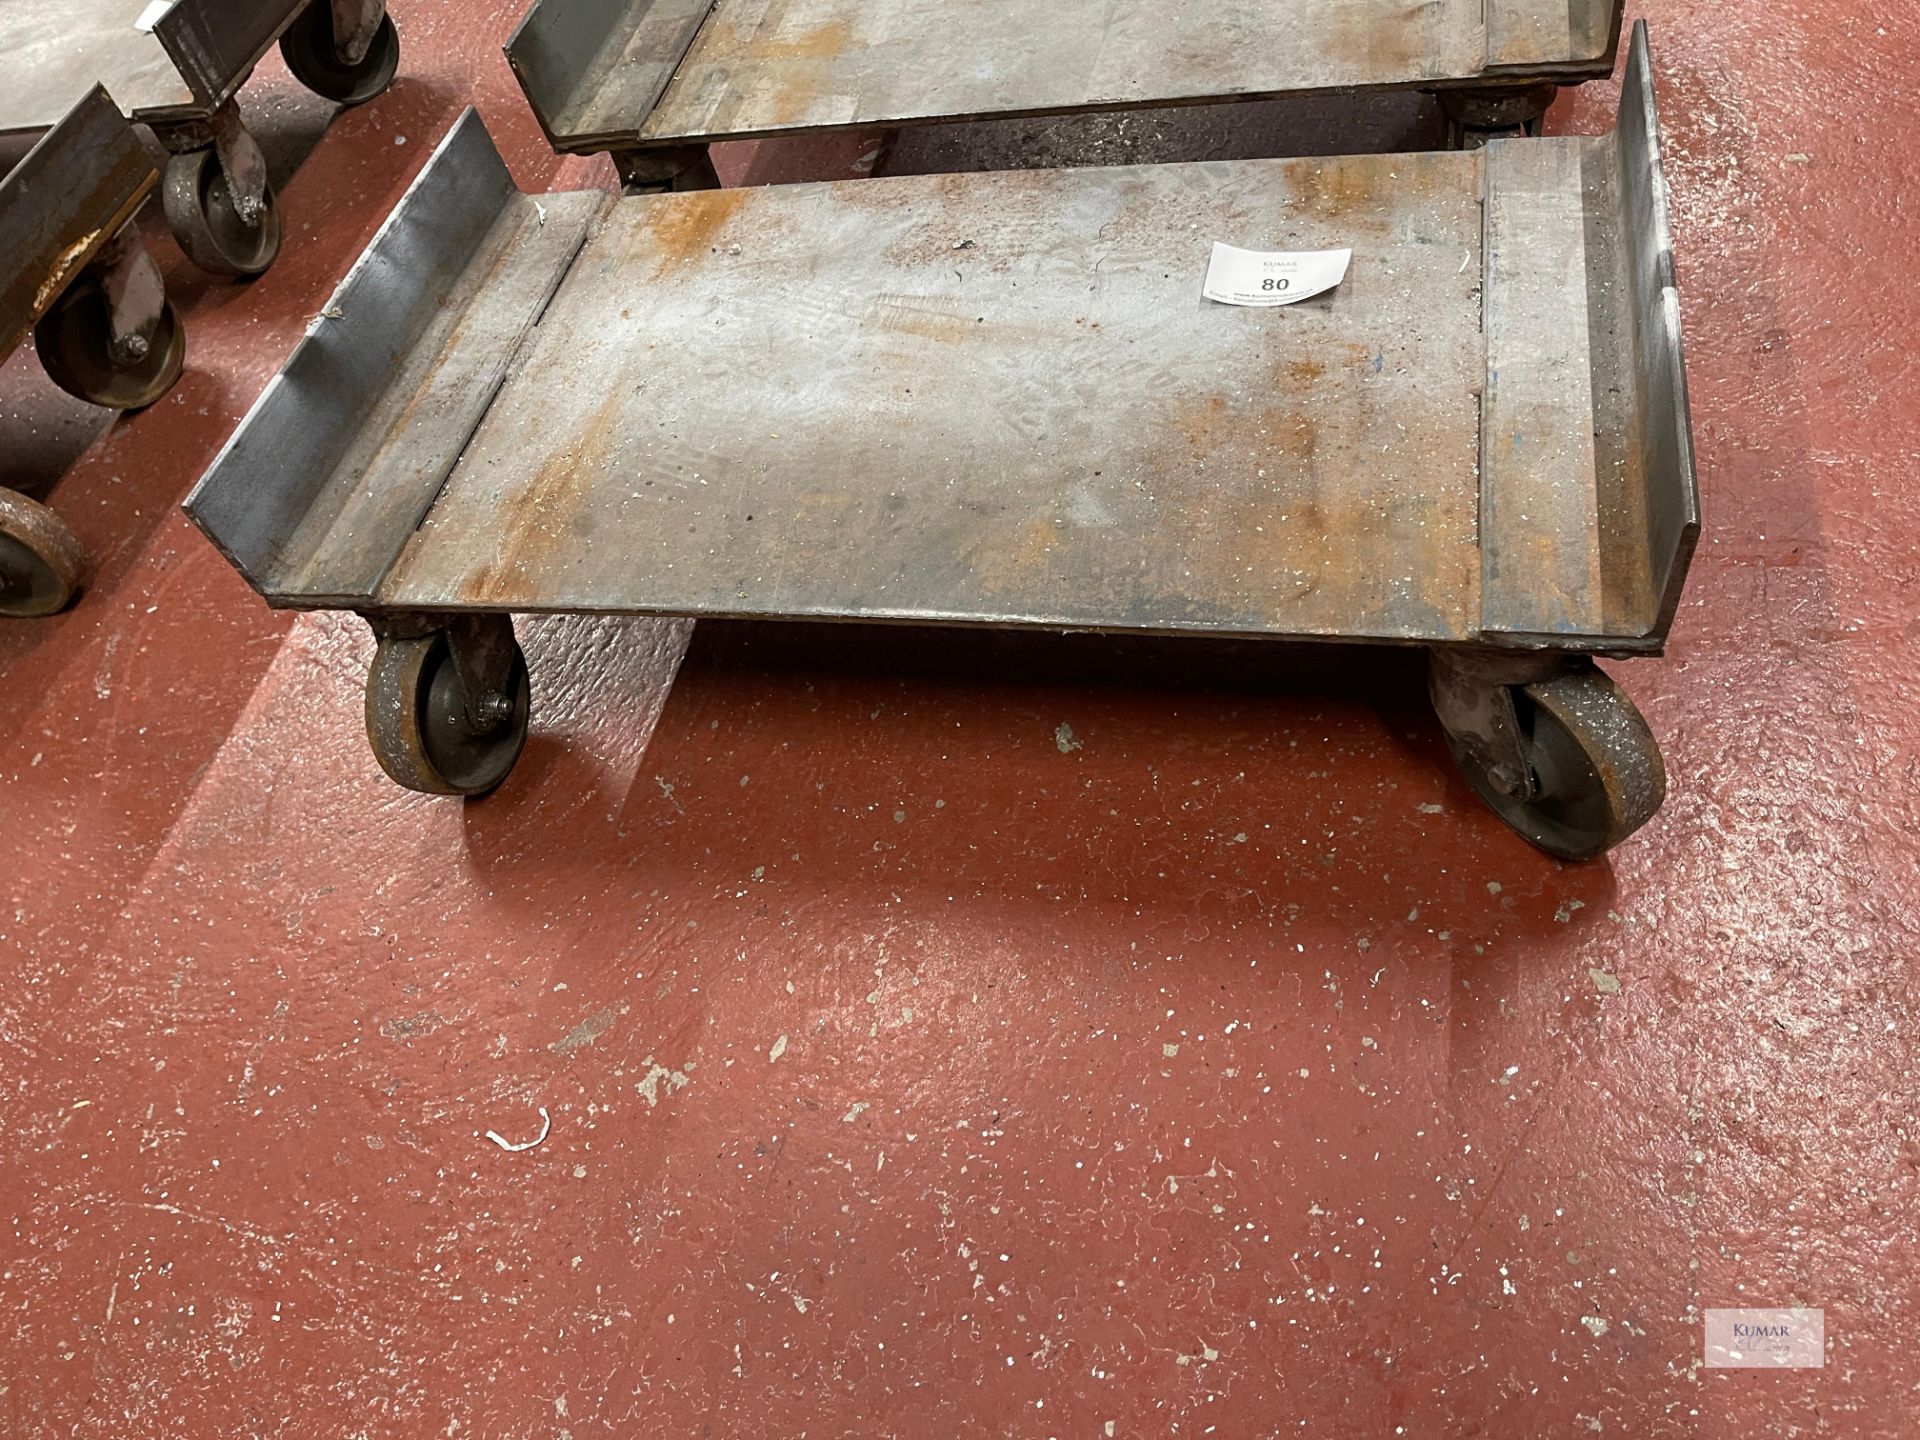 Single Mobile Metal Trolley with Dolly Wheels with Mild Steel Base with Angled Sides - Image 2 of 2